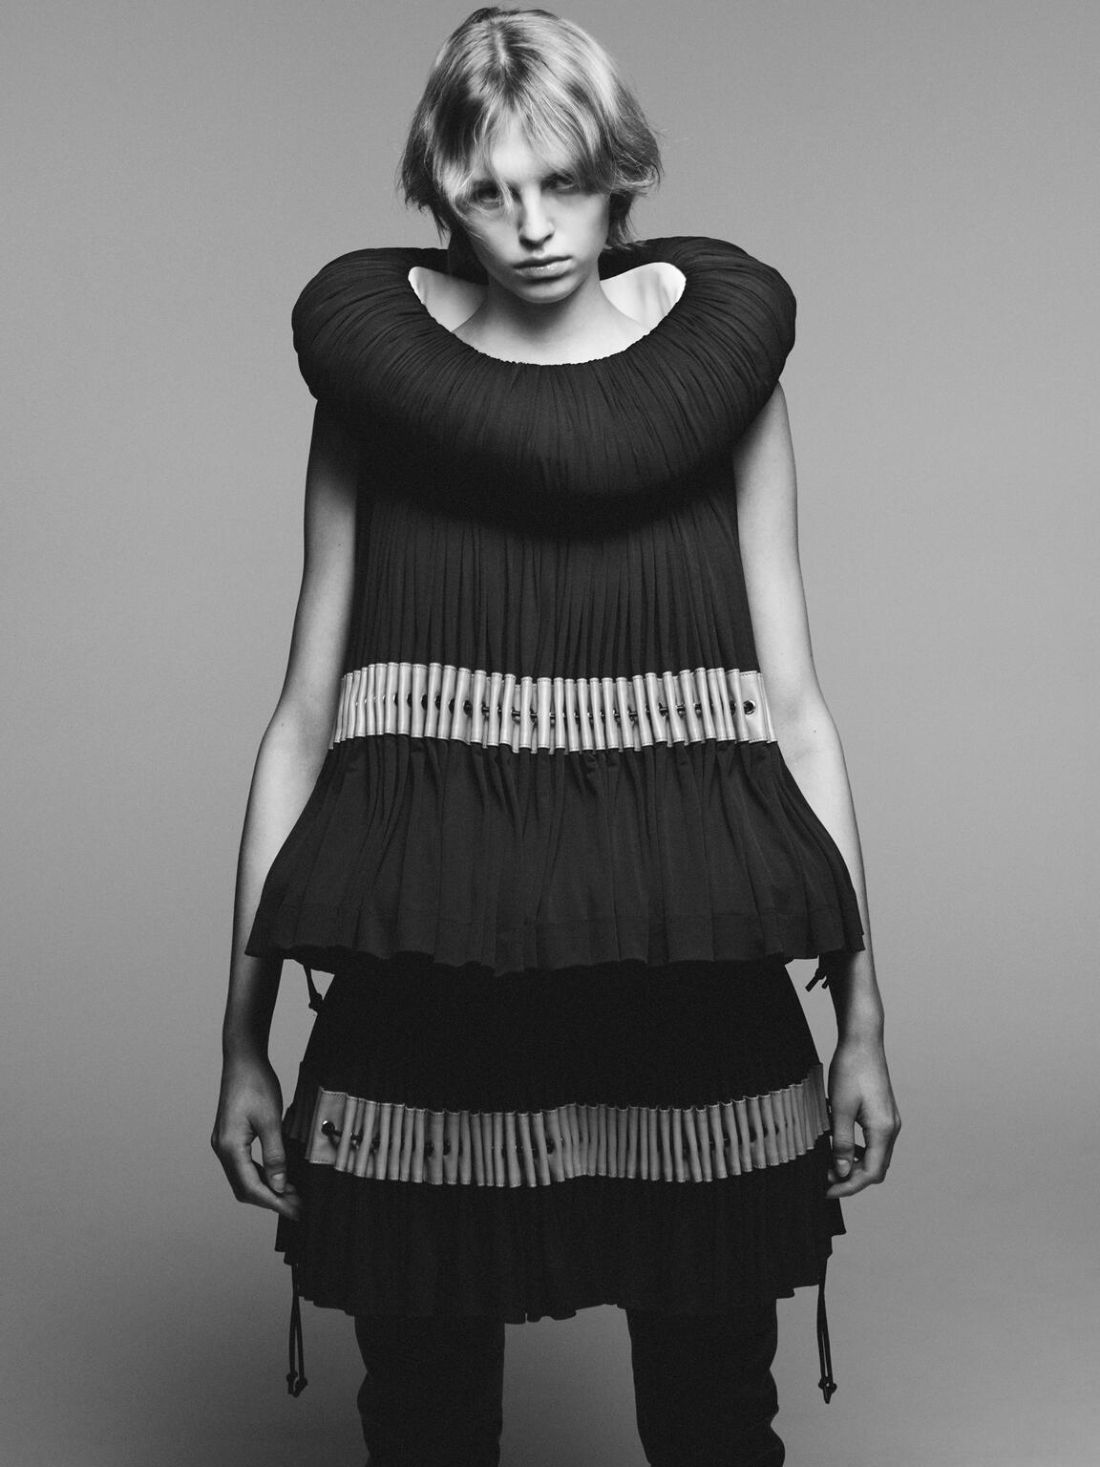 A Viscose Jersey Top and Skirt by Louis Vuitton